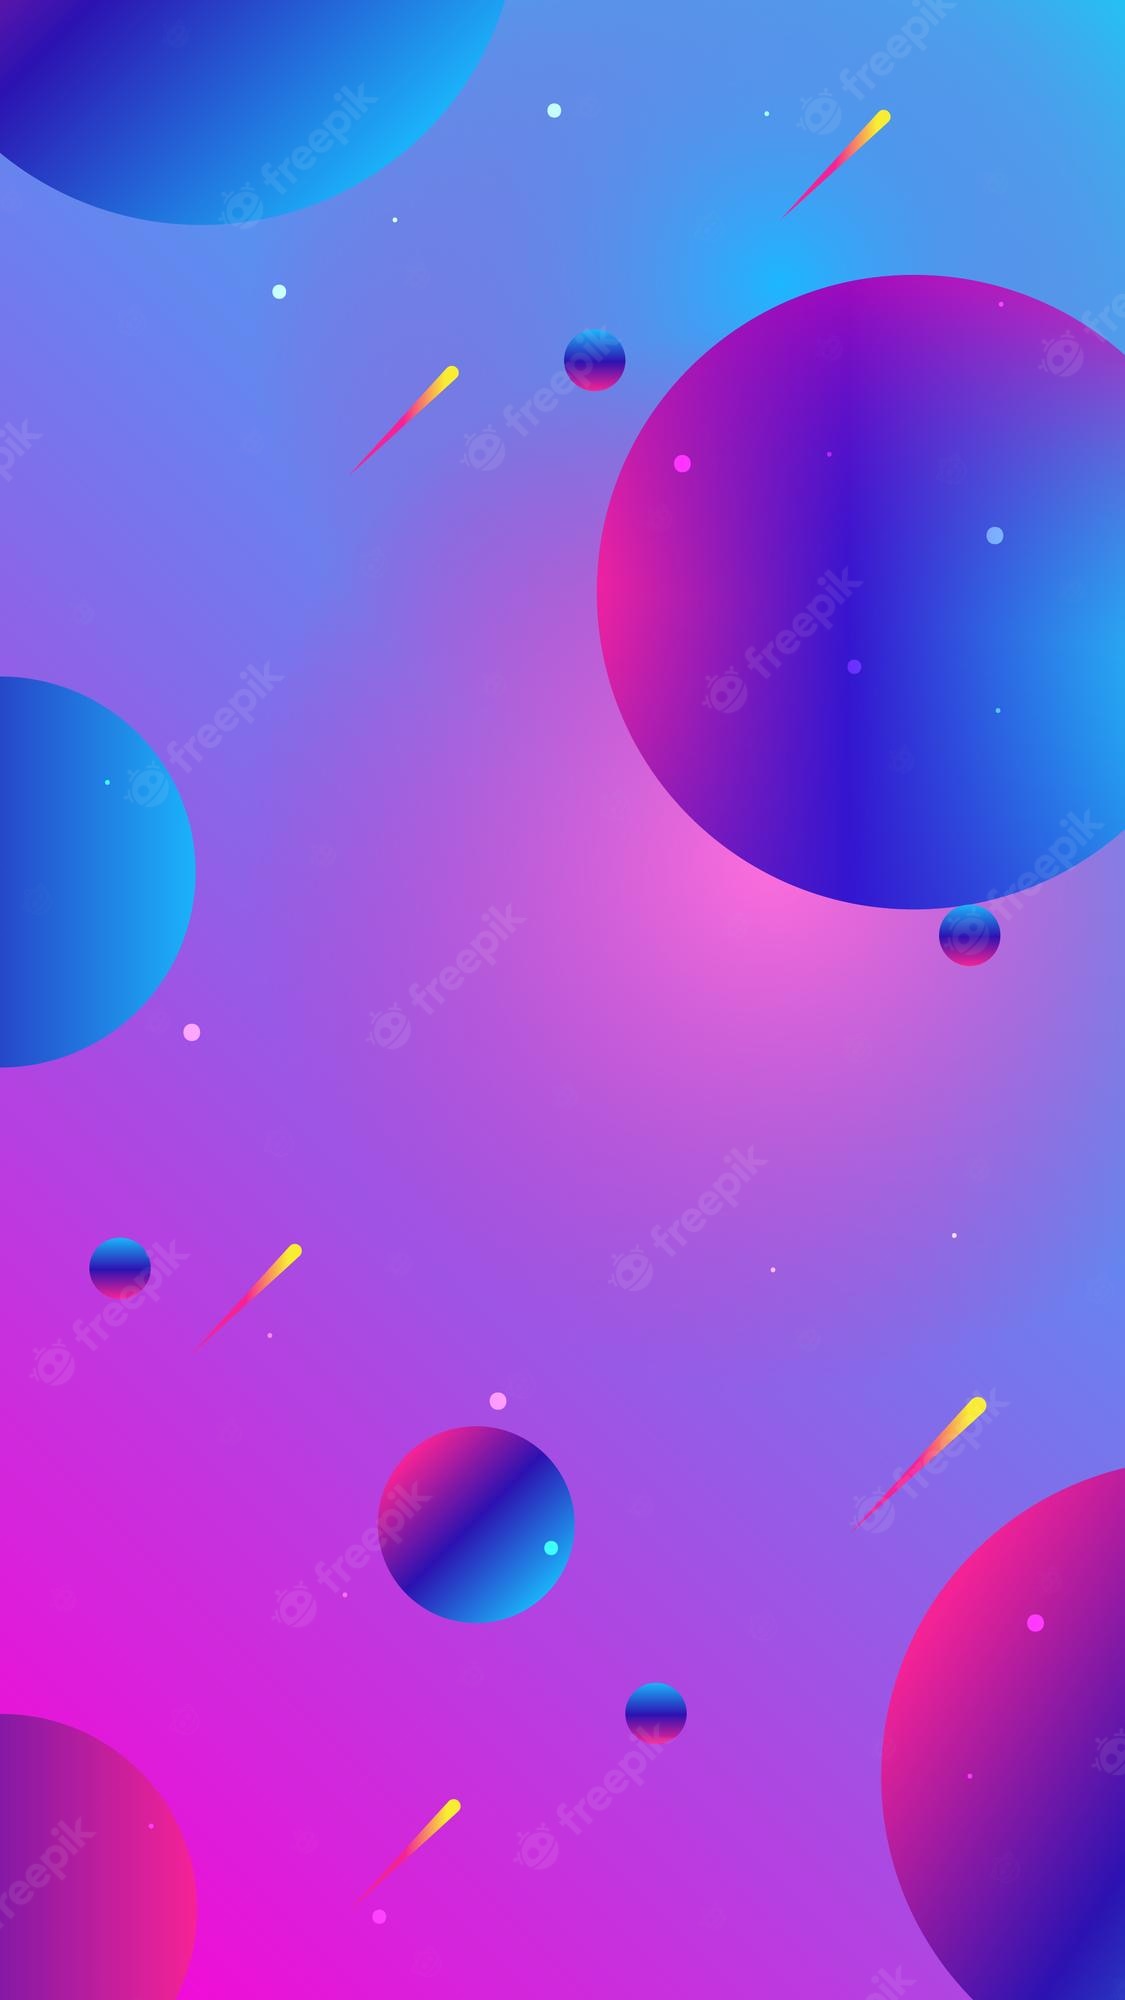 Cool Design Iphone Wallpapers